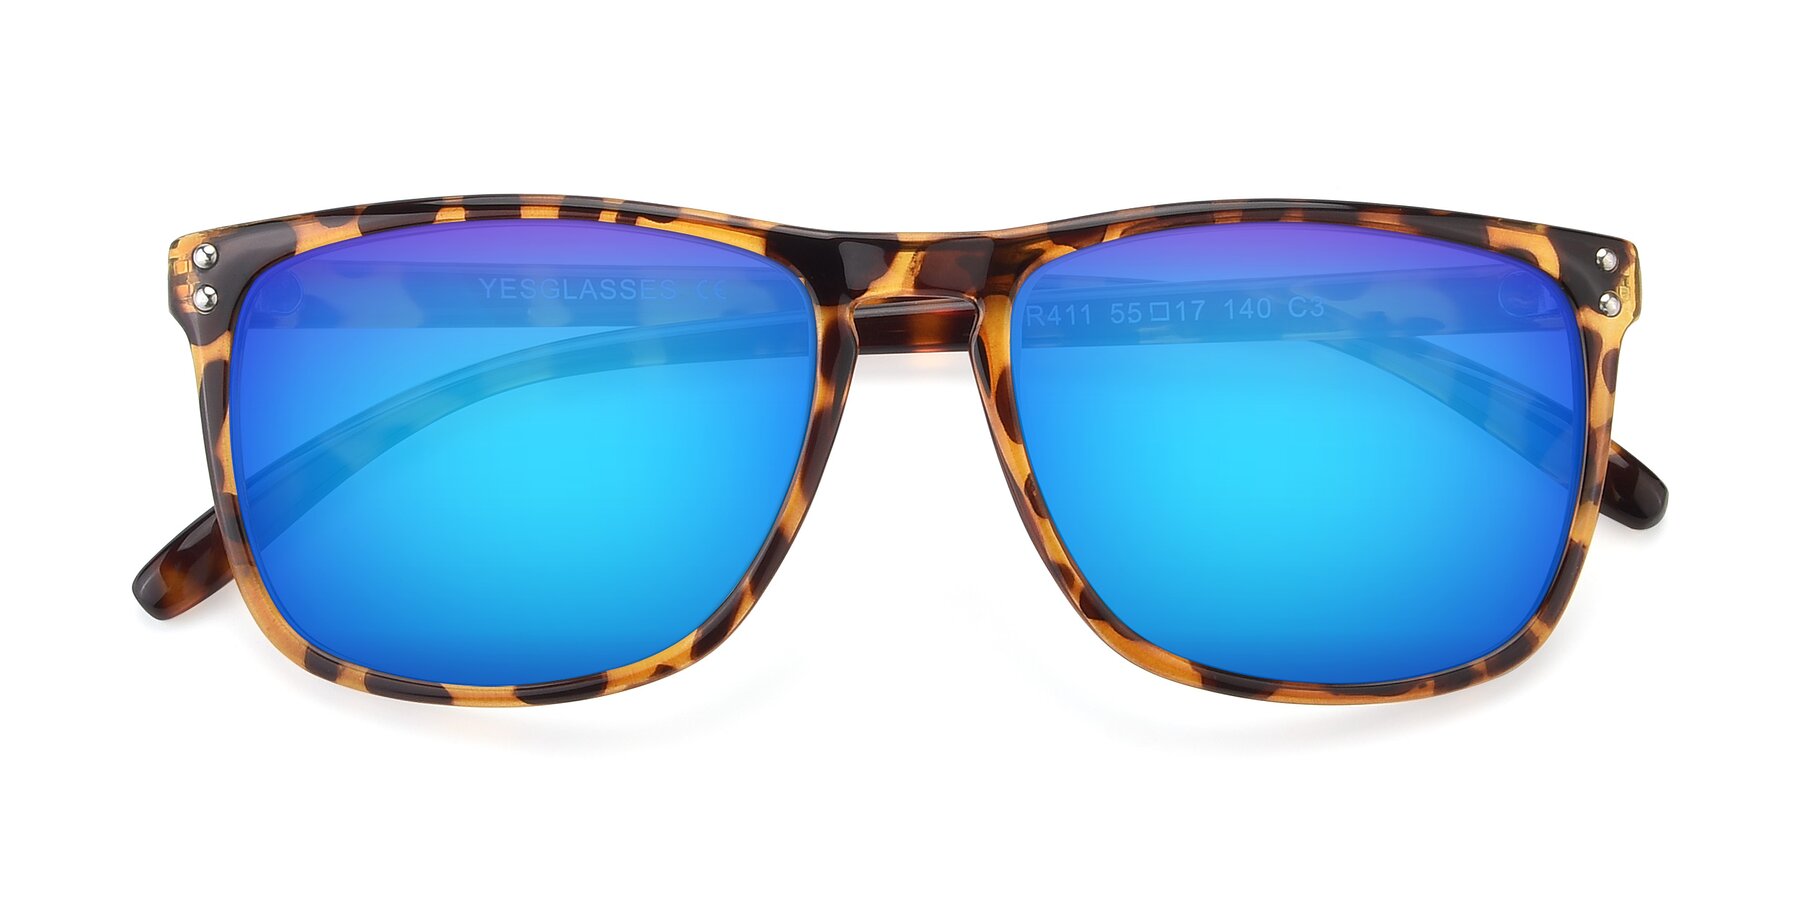 View of SSR411 in Translucent Orange Tortoise with Blue Mirrored Lenses